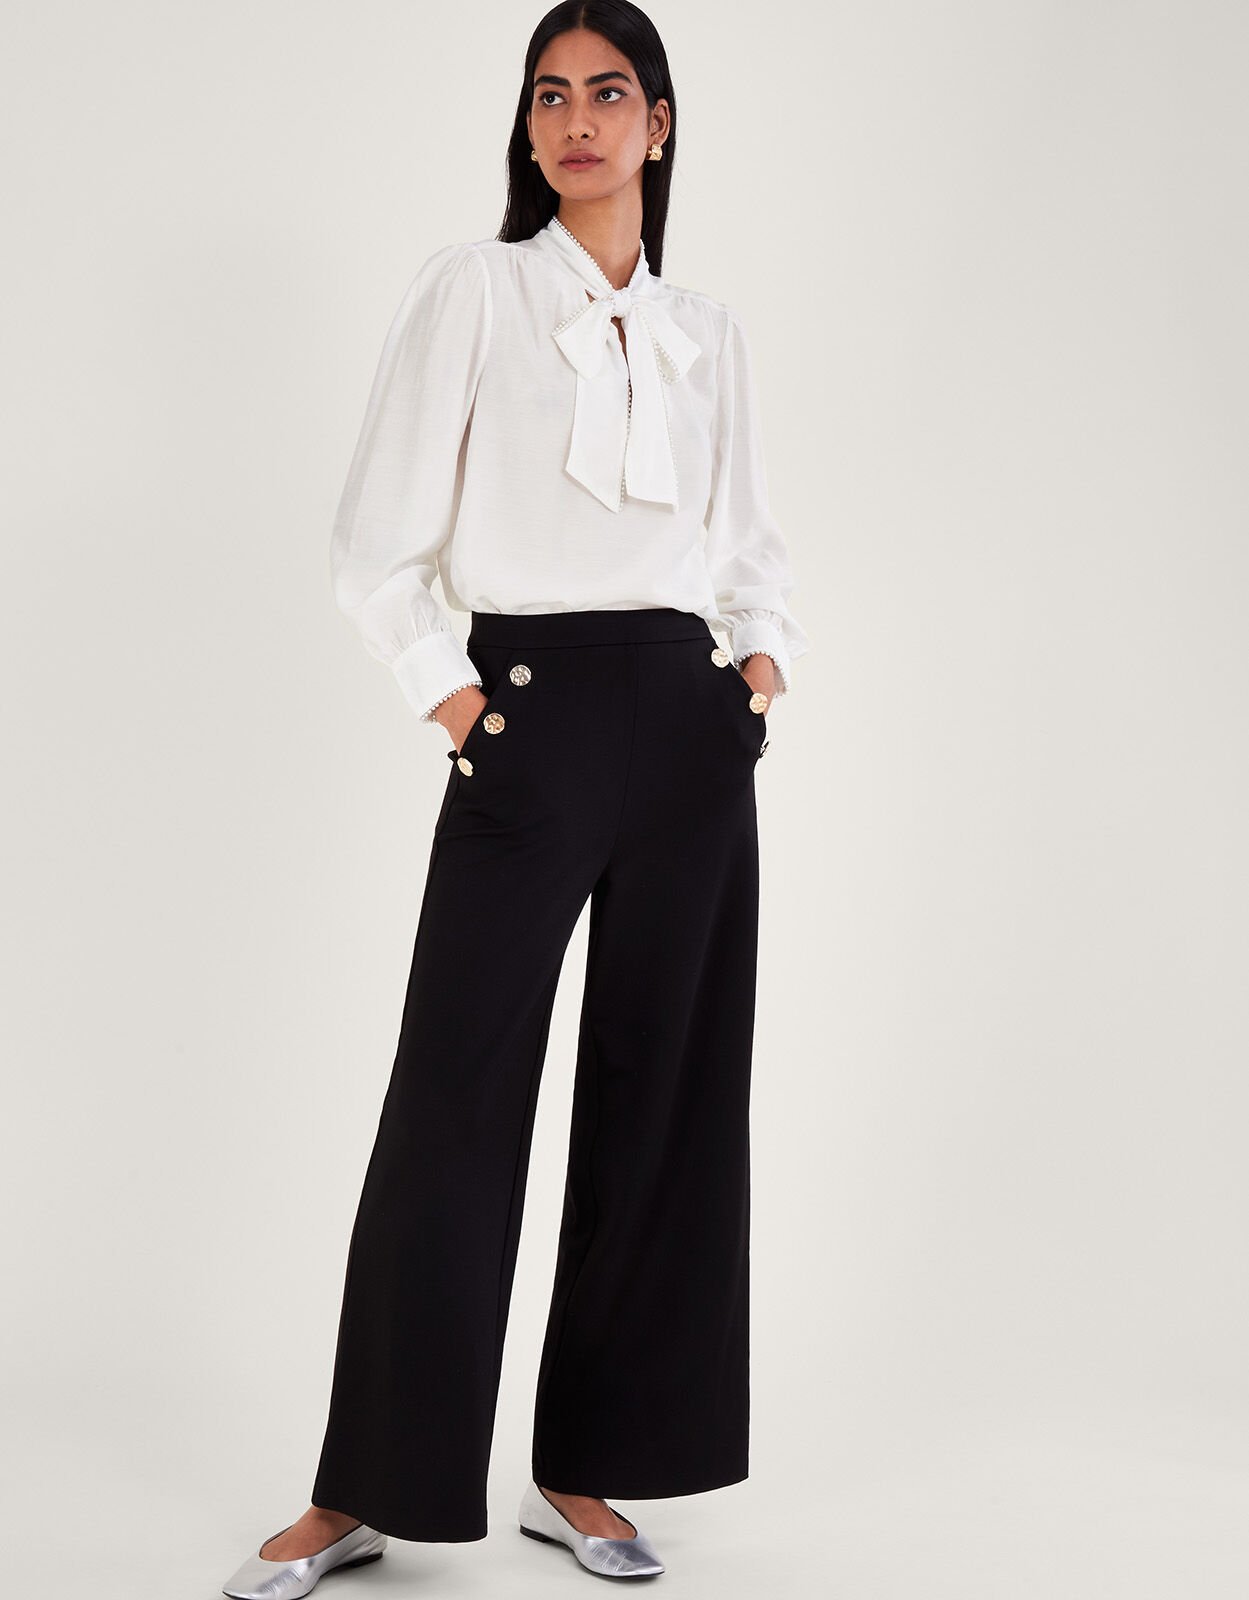 Palazzo Party Wear SUSTAINABLE LADIES PANTS Wide